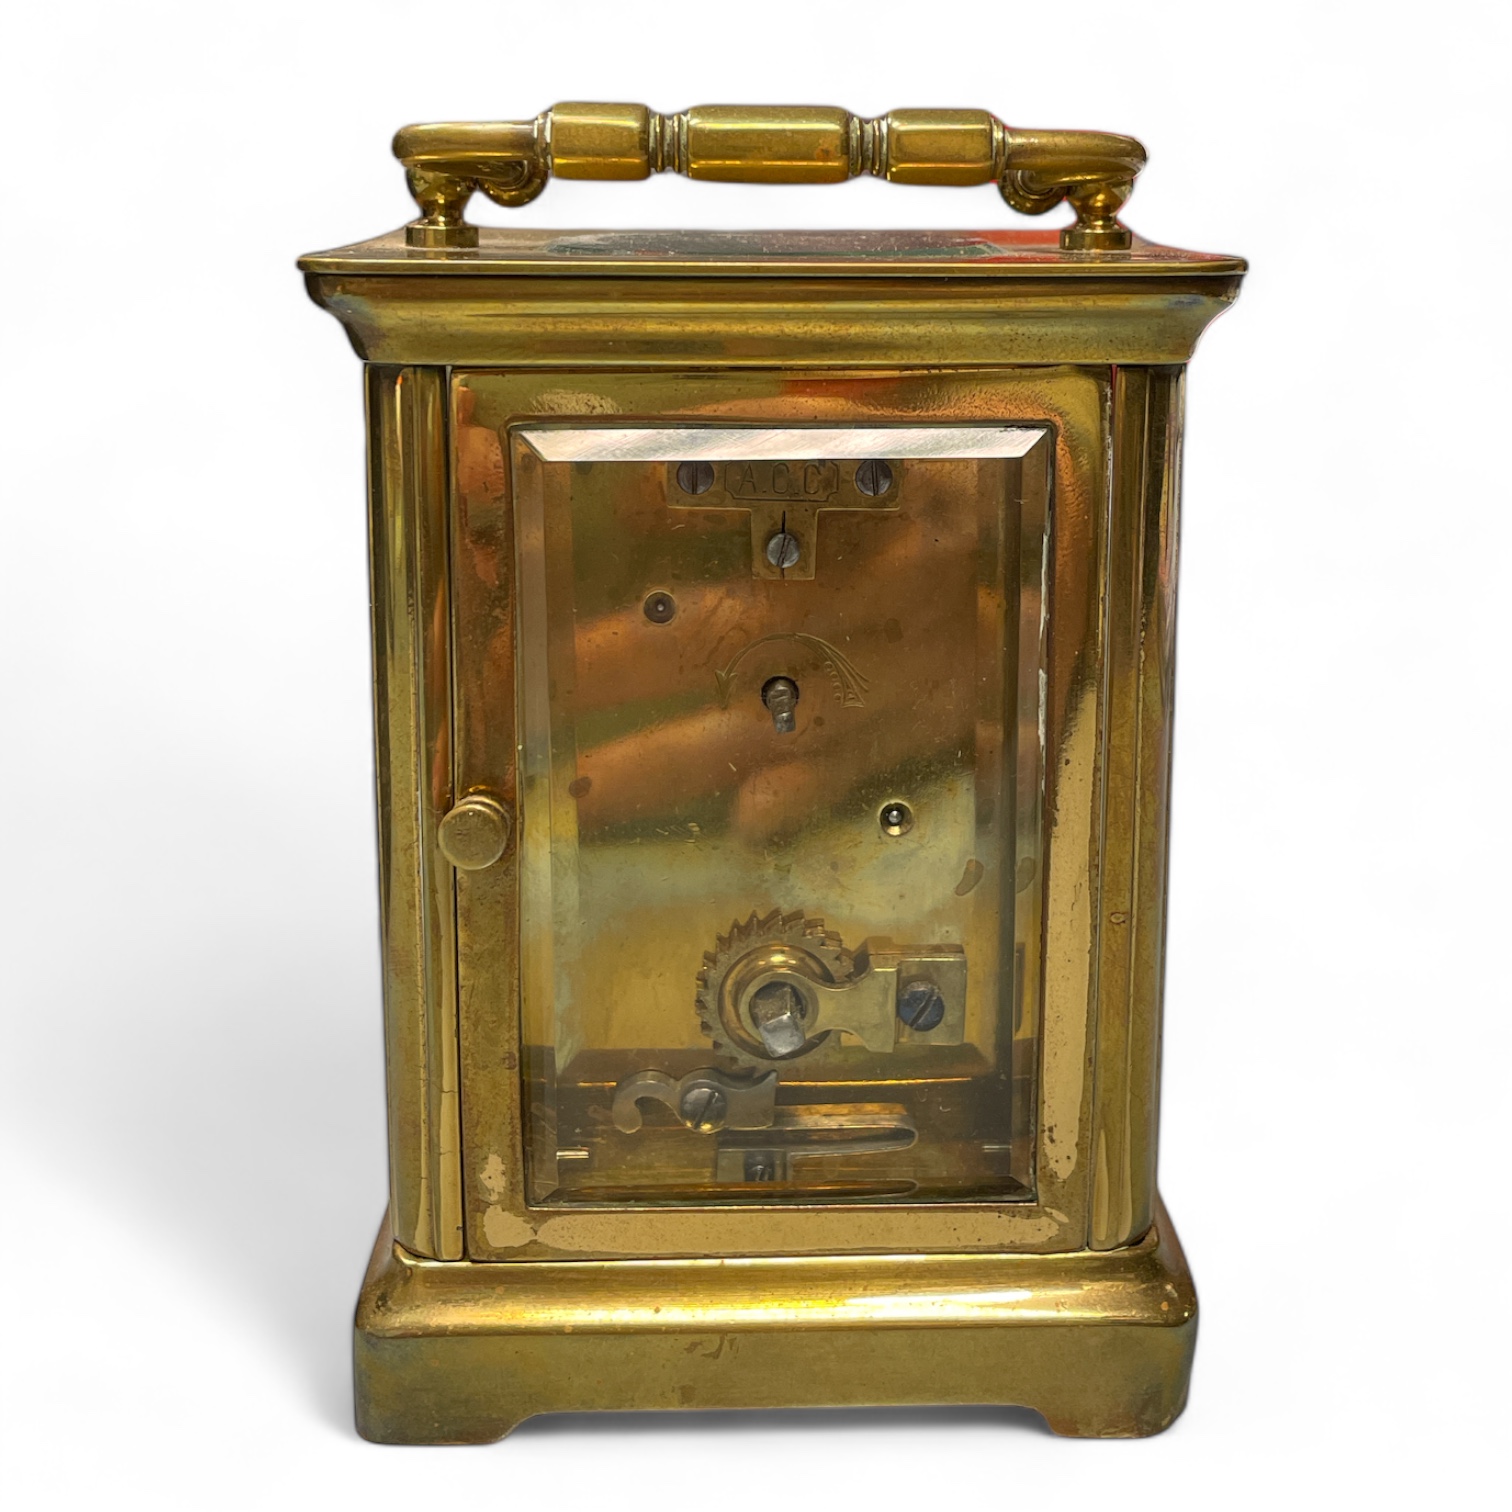 A brass carriage clock, 12cm tall with handle down in an associated leather case, in running order. - Image 2 of 3